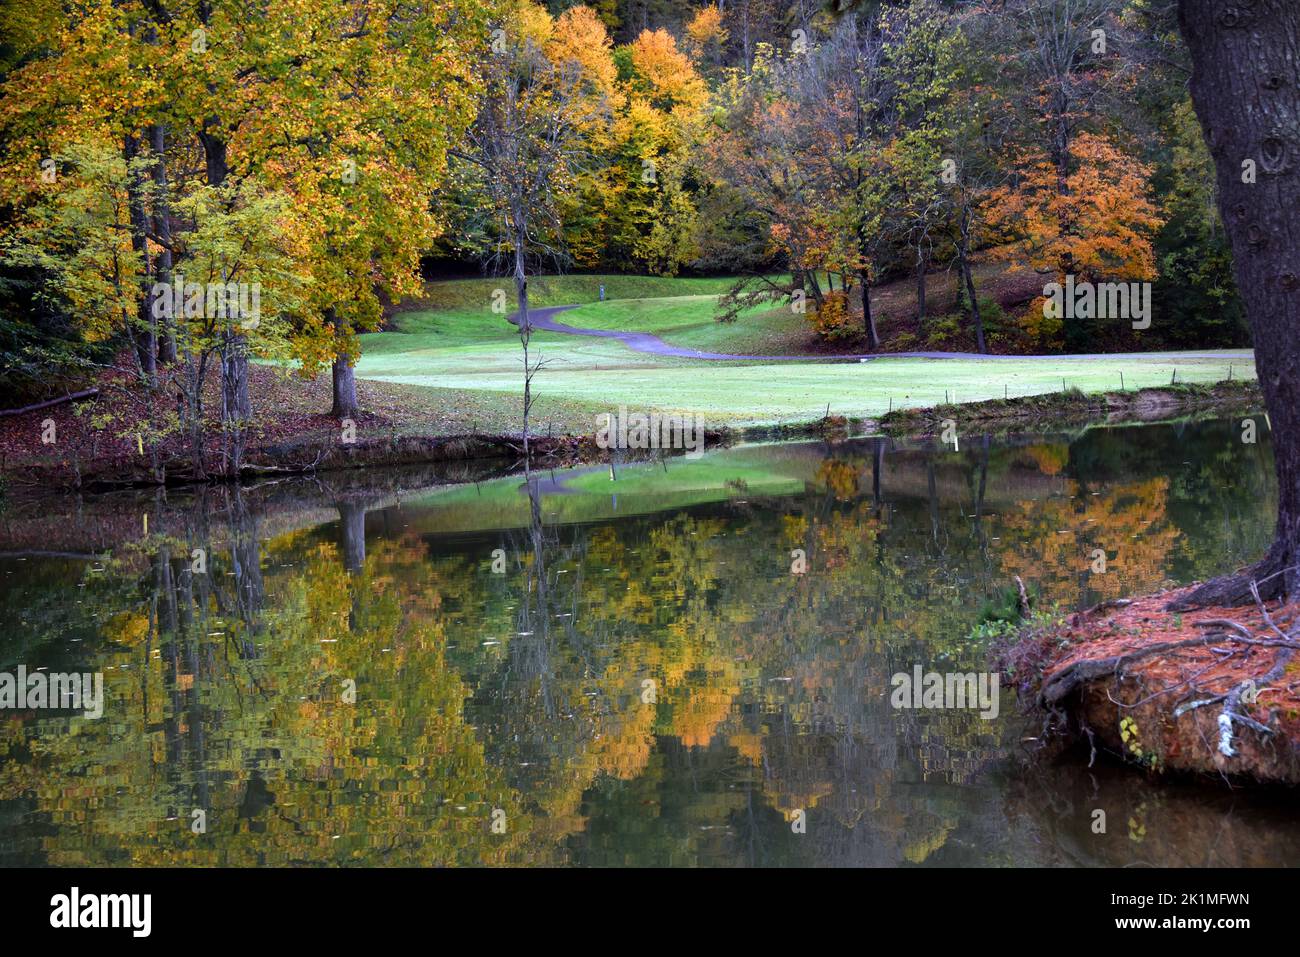 Autumn trees are reflected in the still waters of Steele Creek Lake in Bristol, Tennessee.  Golf cart track curves around golf course. Stock Photo